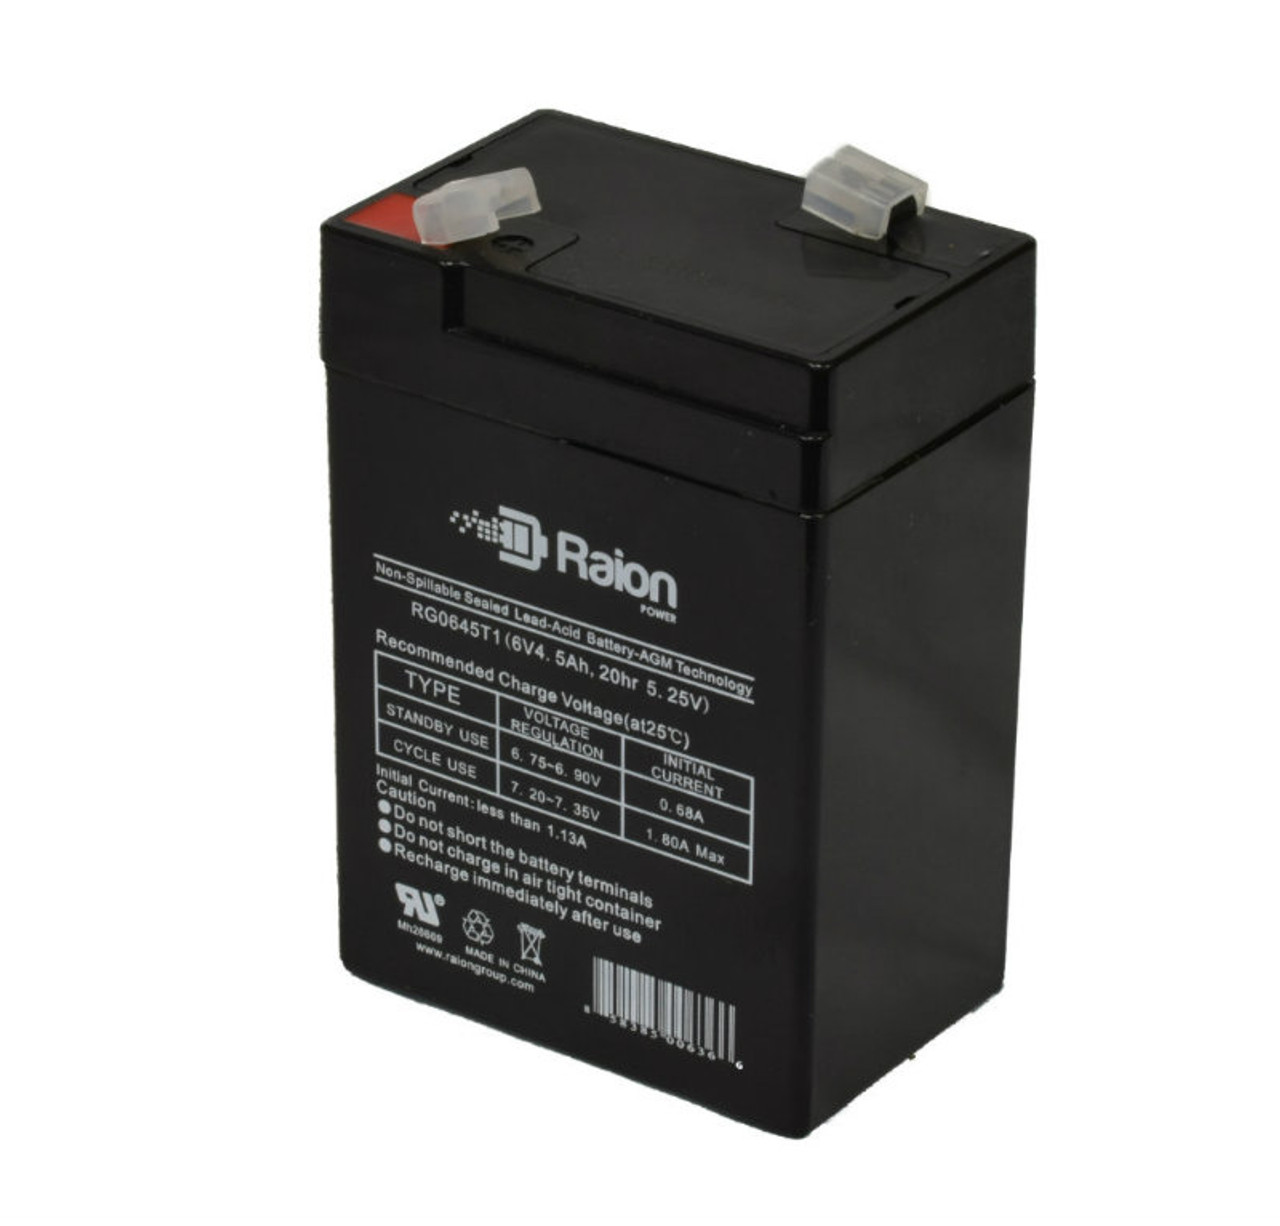 Raion Power RG0645T1 6V 4.5Ah Replacement Battery Cartridge for CooPower CP6-4.5